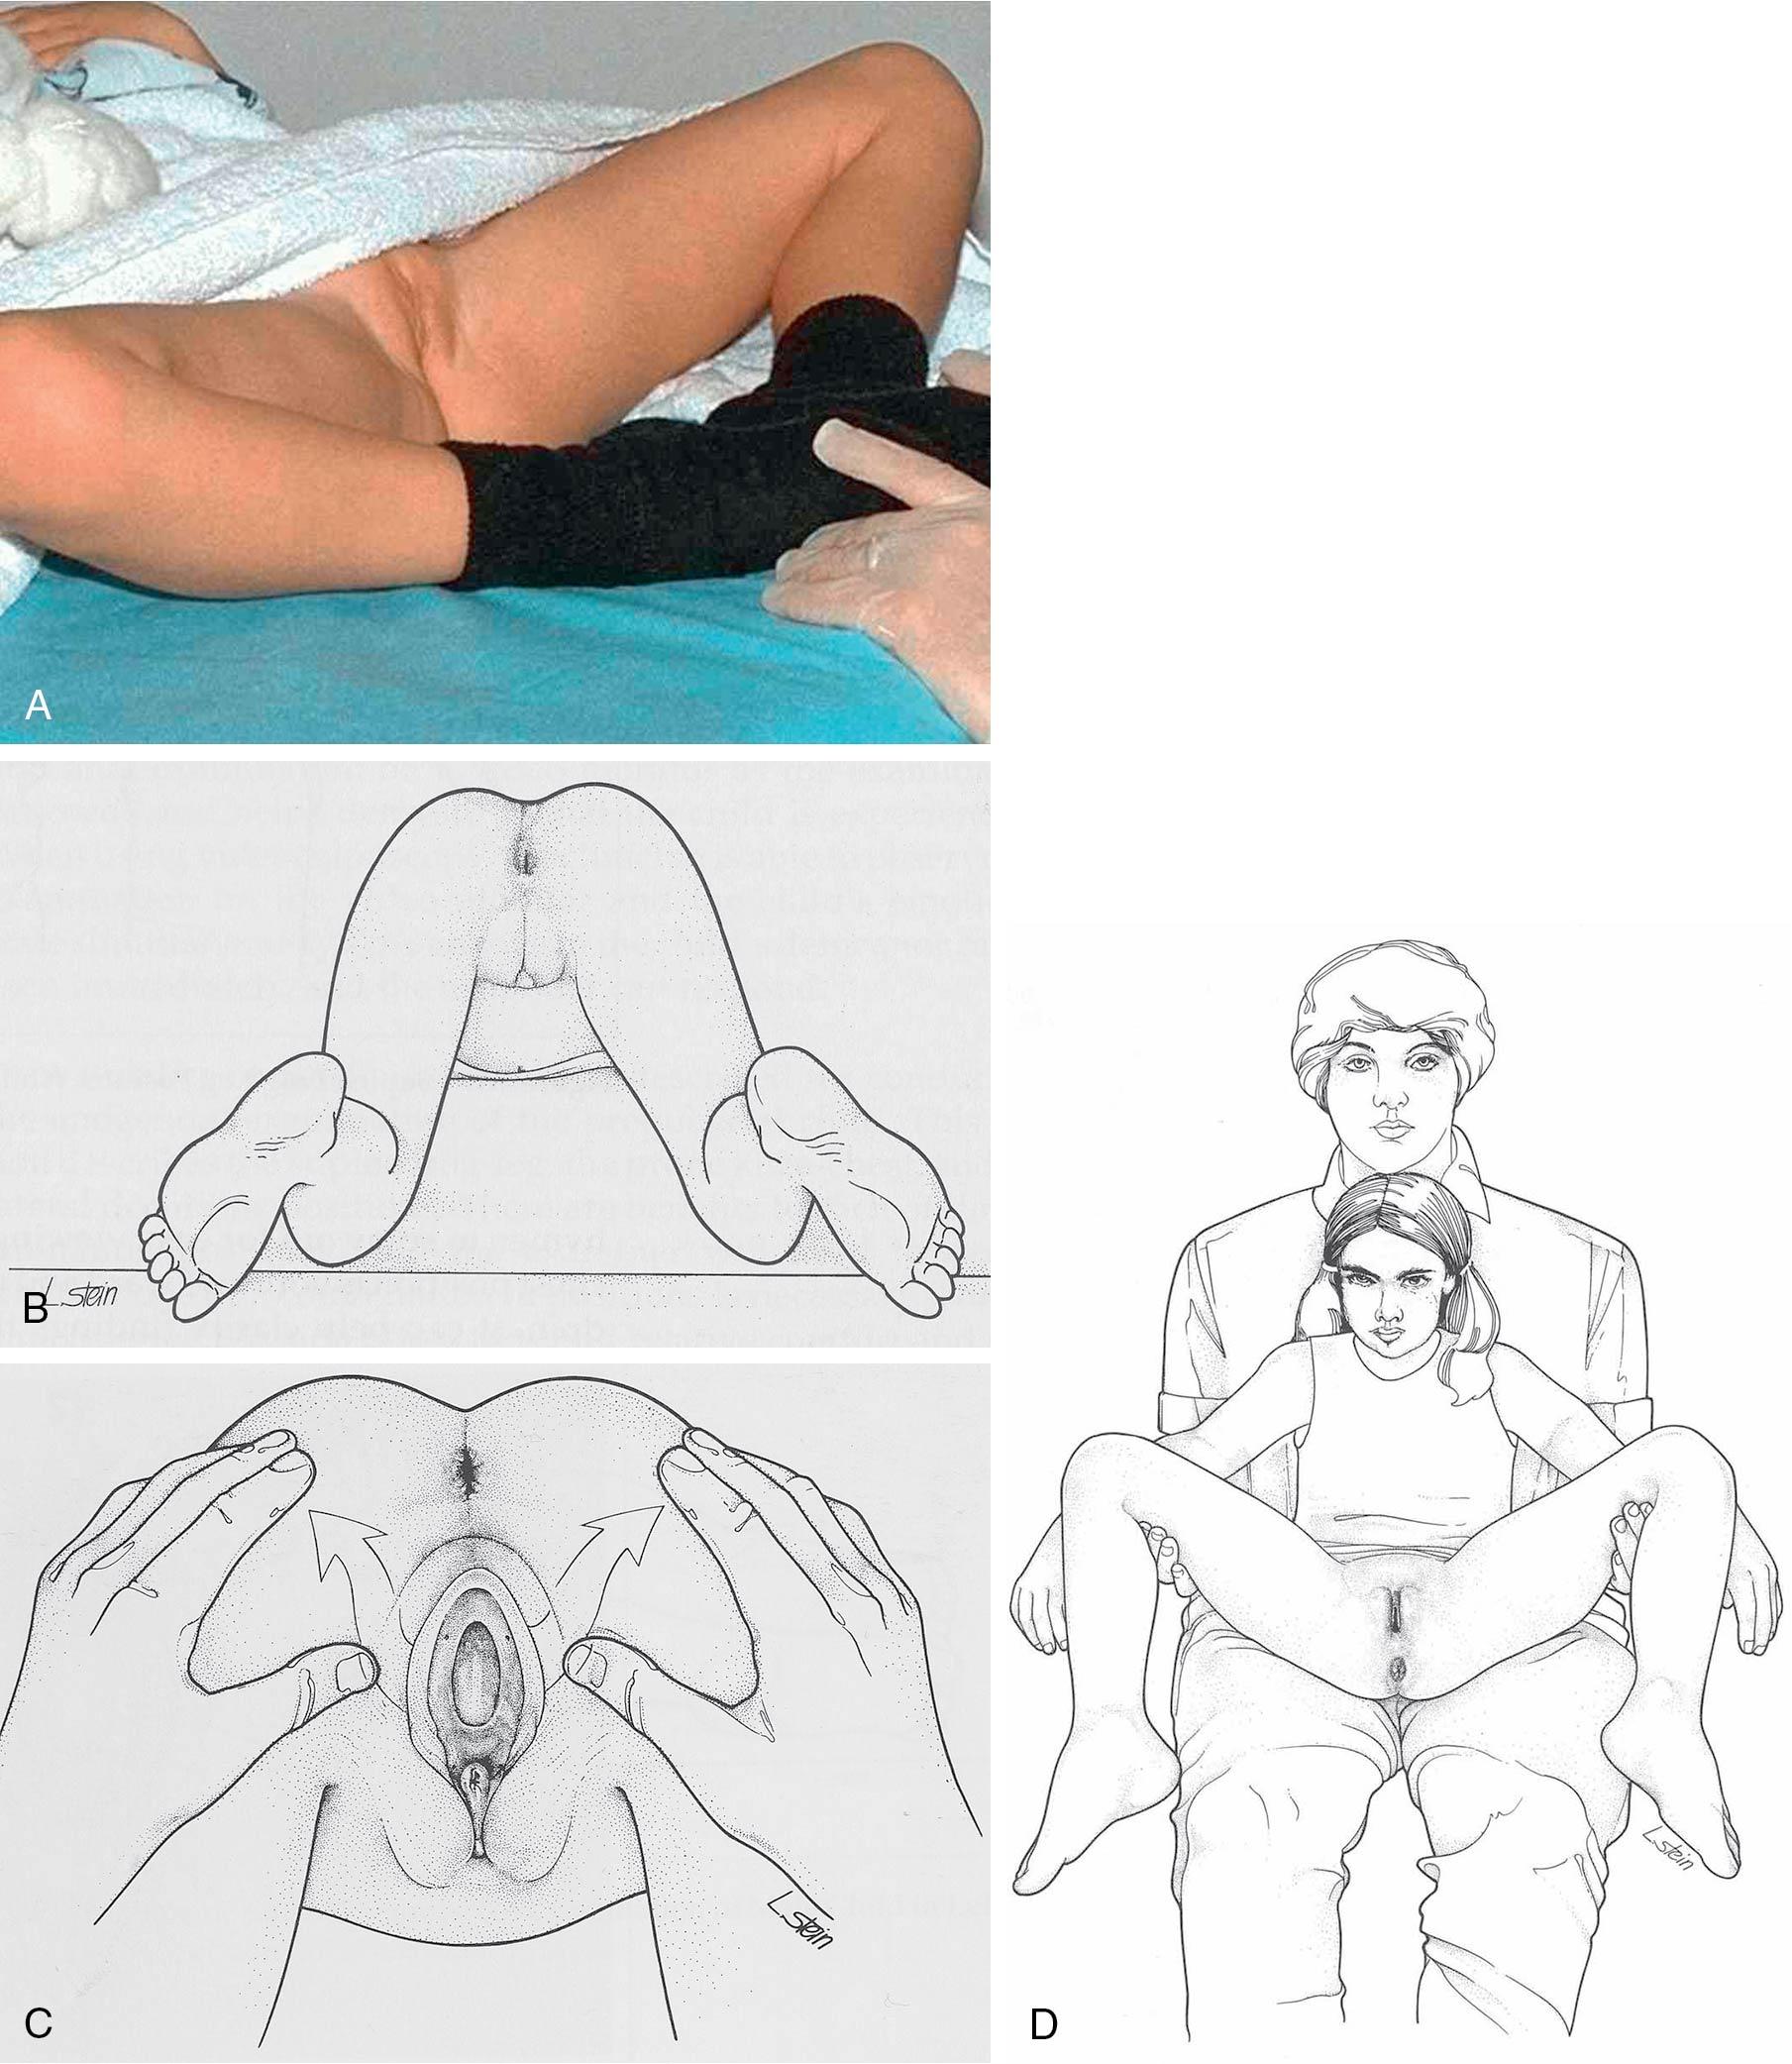 Fig. 12.1, Different positions for performing a gynecologic examination on a child. A, Frog leg position. B, Knee-chest position. C, Prone position. D, Sitting on mom’s lap.